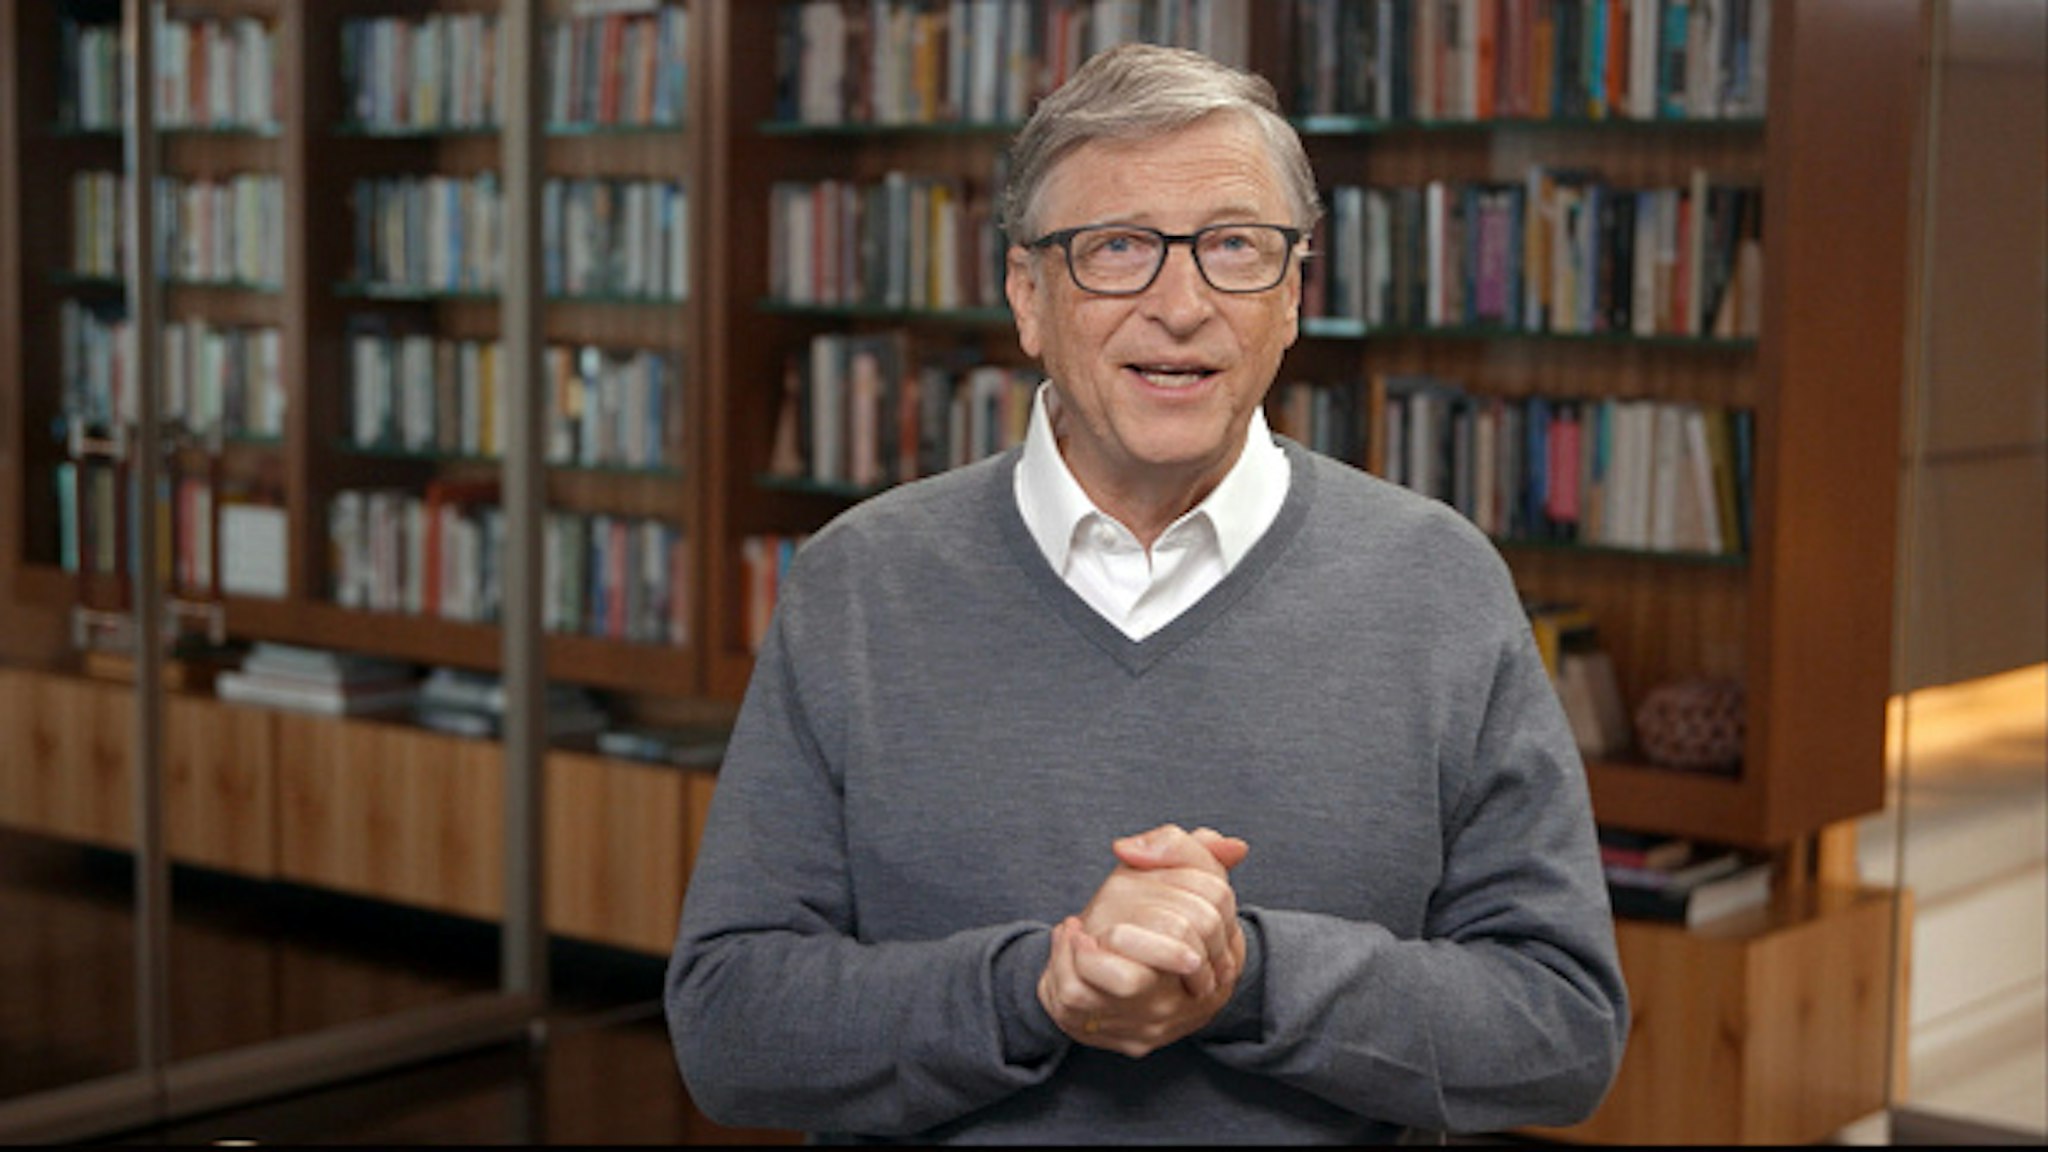 UNSPECIFIED - JUNE 24: In this screengrab, Bill Gates speaks during All In WA: A Concert For COVID-19 Relief on June 24, 2020 in Washington. (